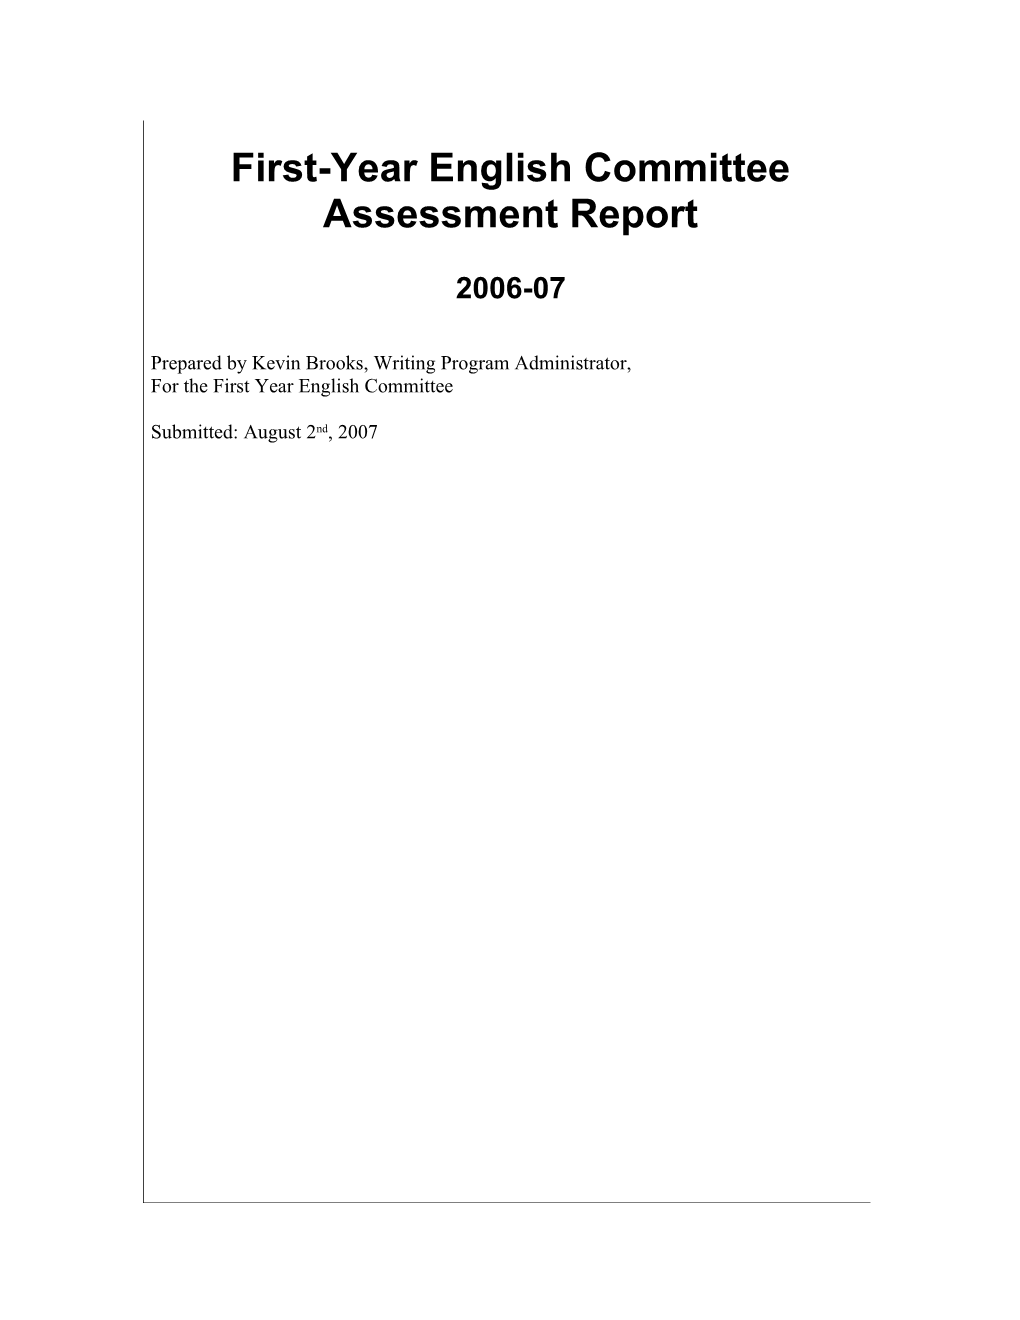 First-Year English Committee Assessment Report